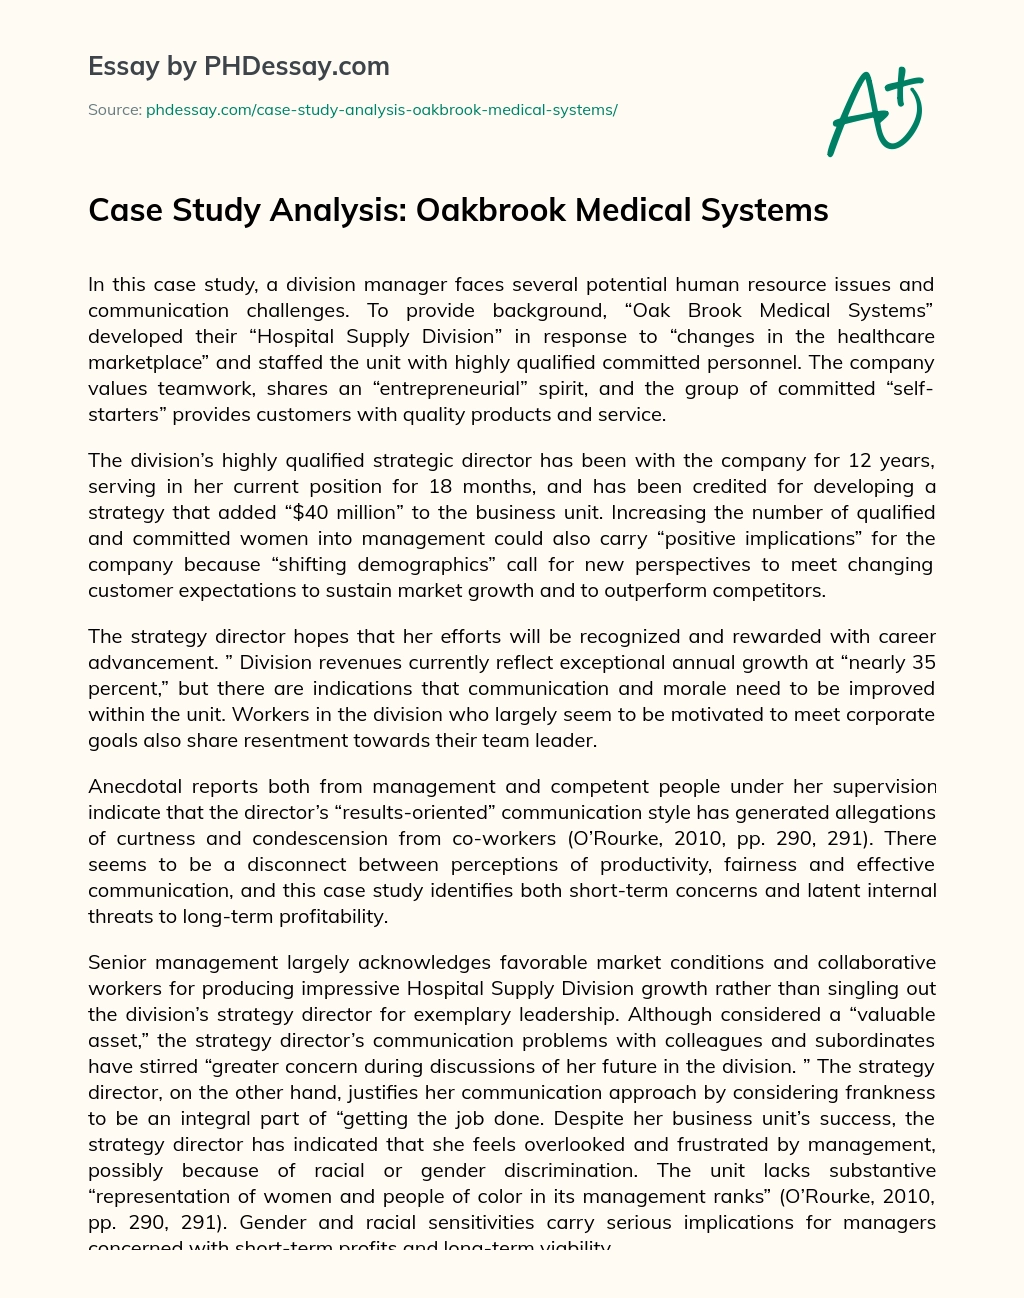 Case Study Analysis: Oakbrook Medical Systems essay